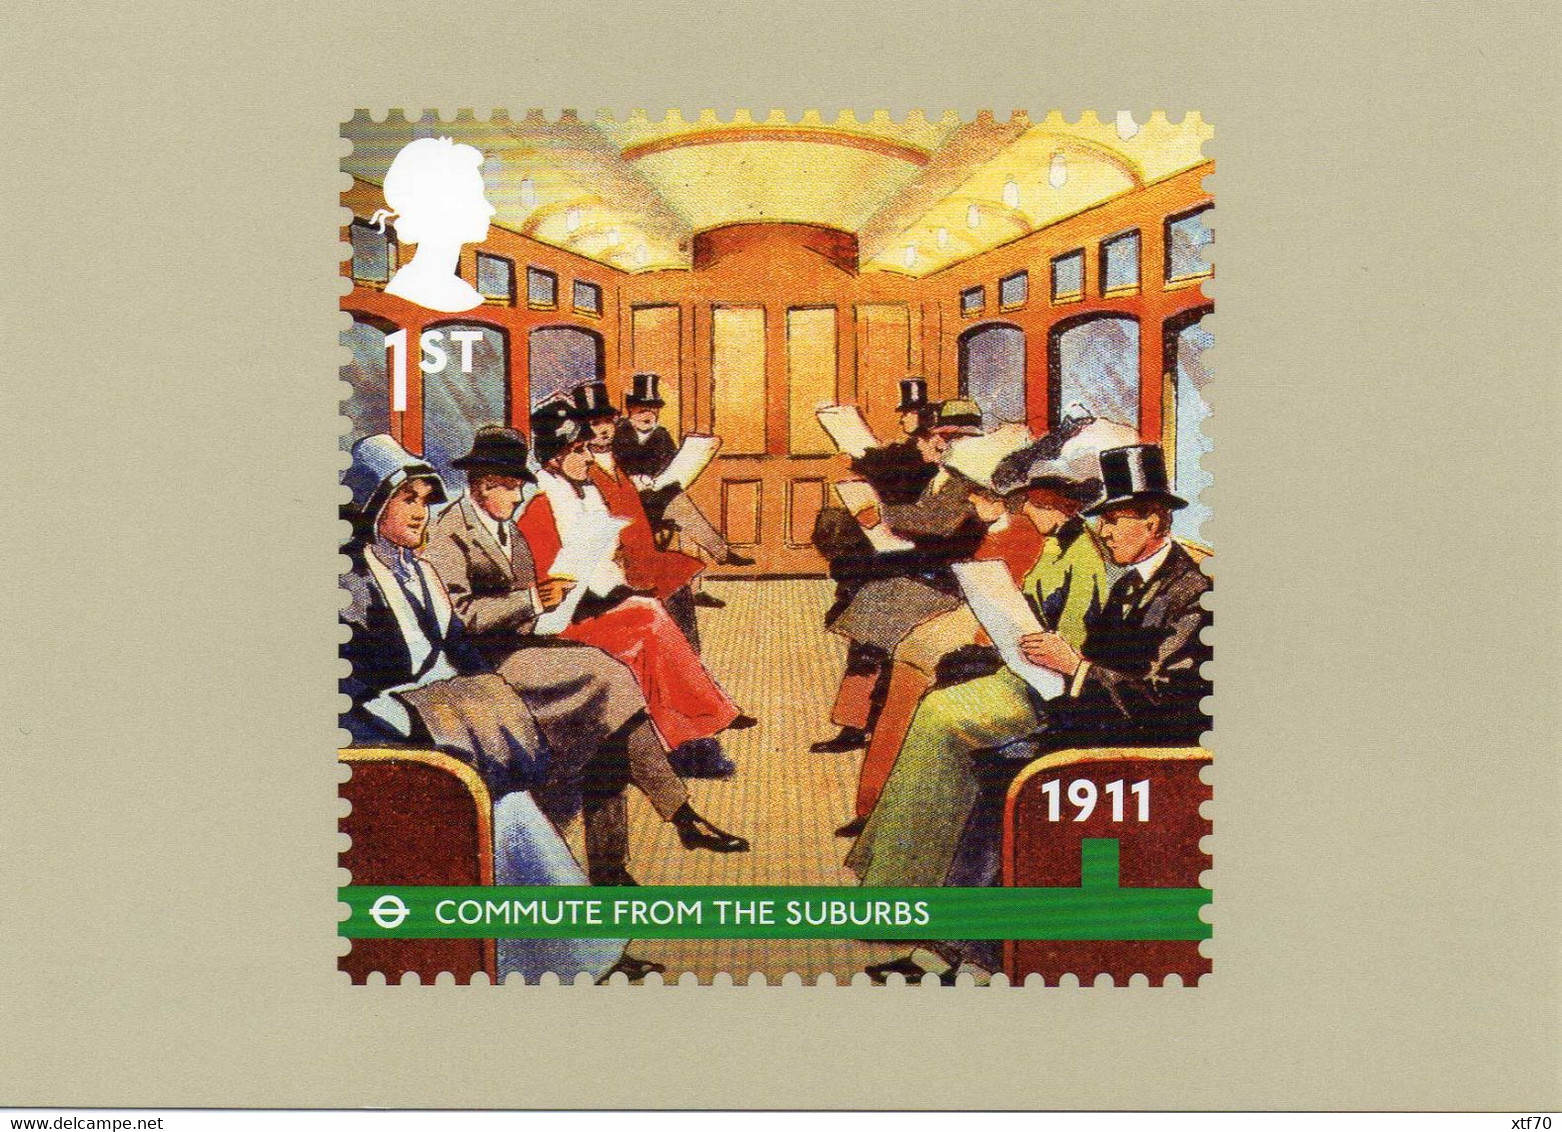 GREAT BRITAIN 2013 150th Anniversary Of The London Underground Mint PHQ Cards - Cartes PHQ